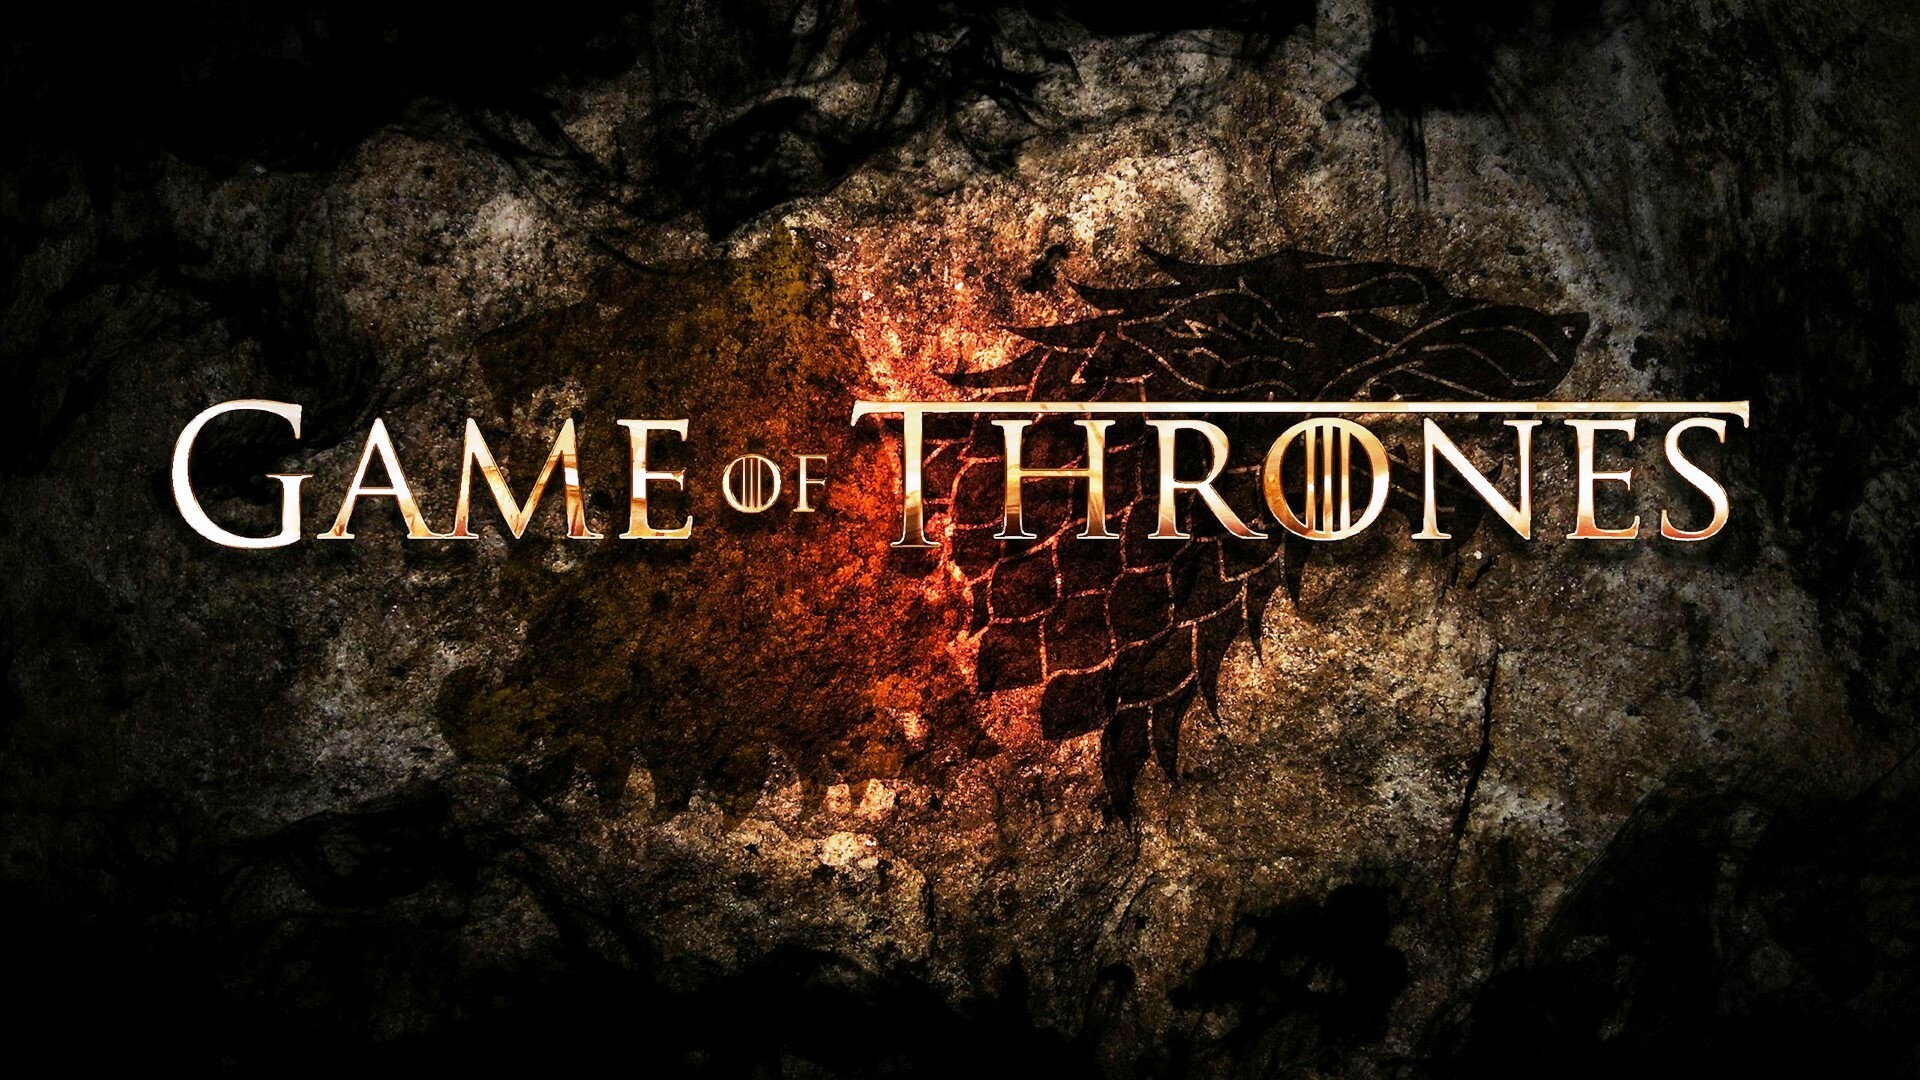 Game of Thrones: The series follows several simultaneous plot lines. 1920x1080 Full HD Background.